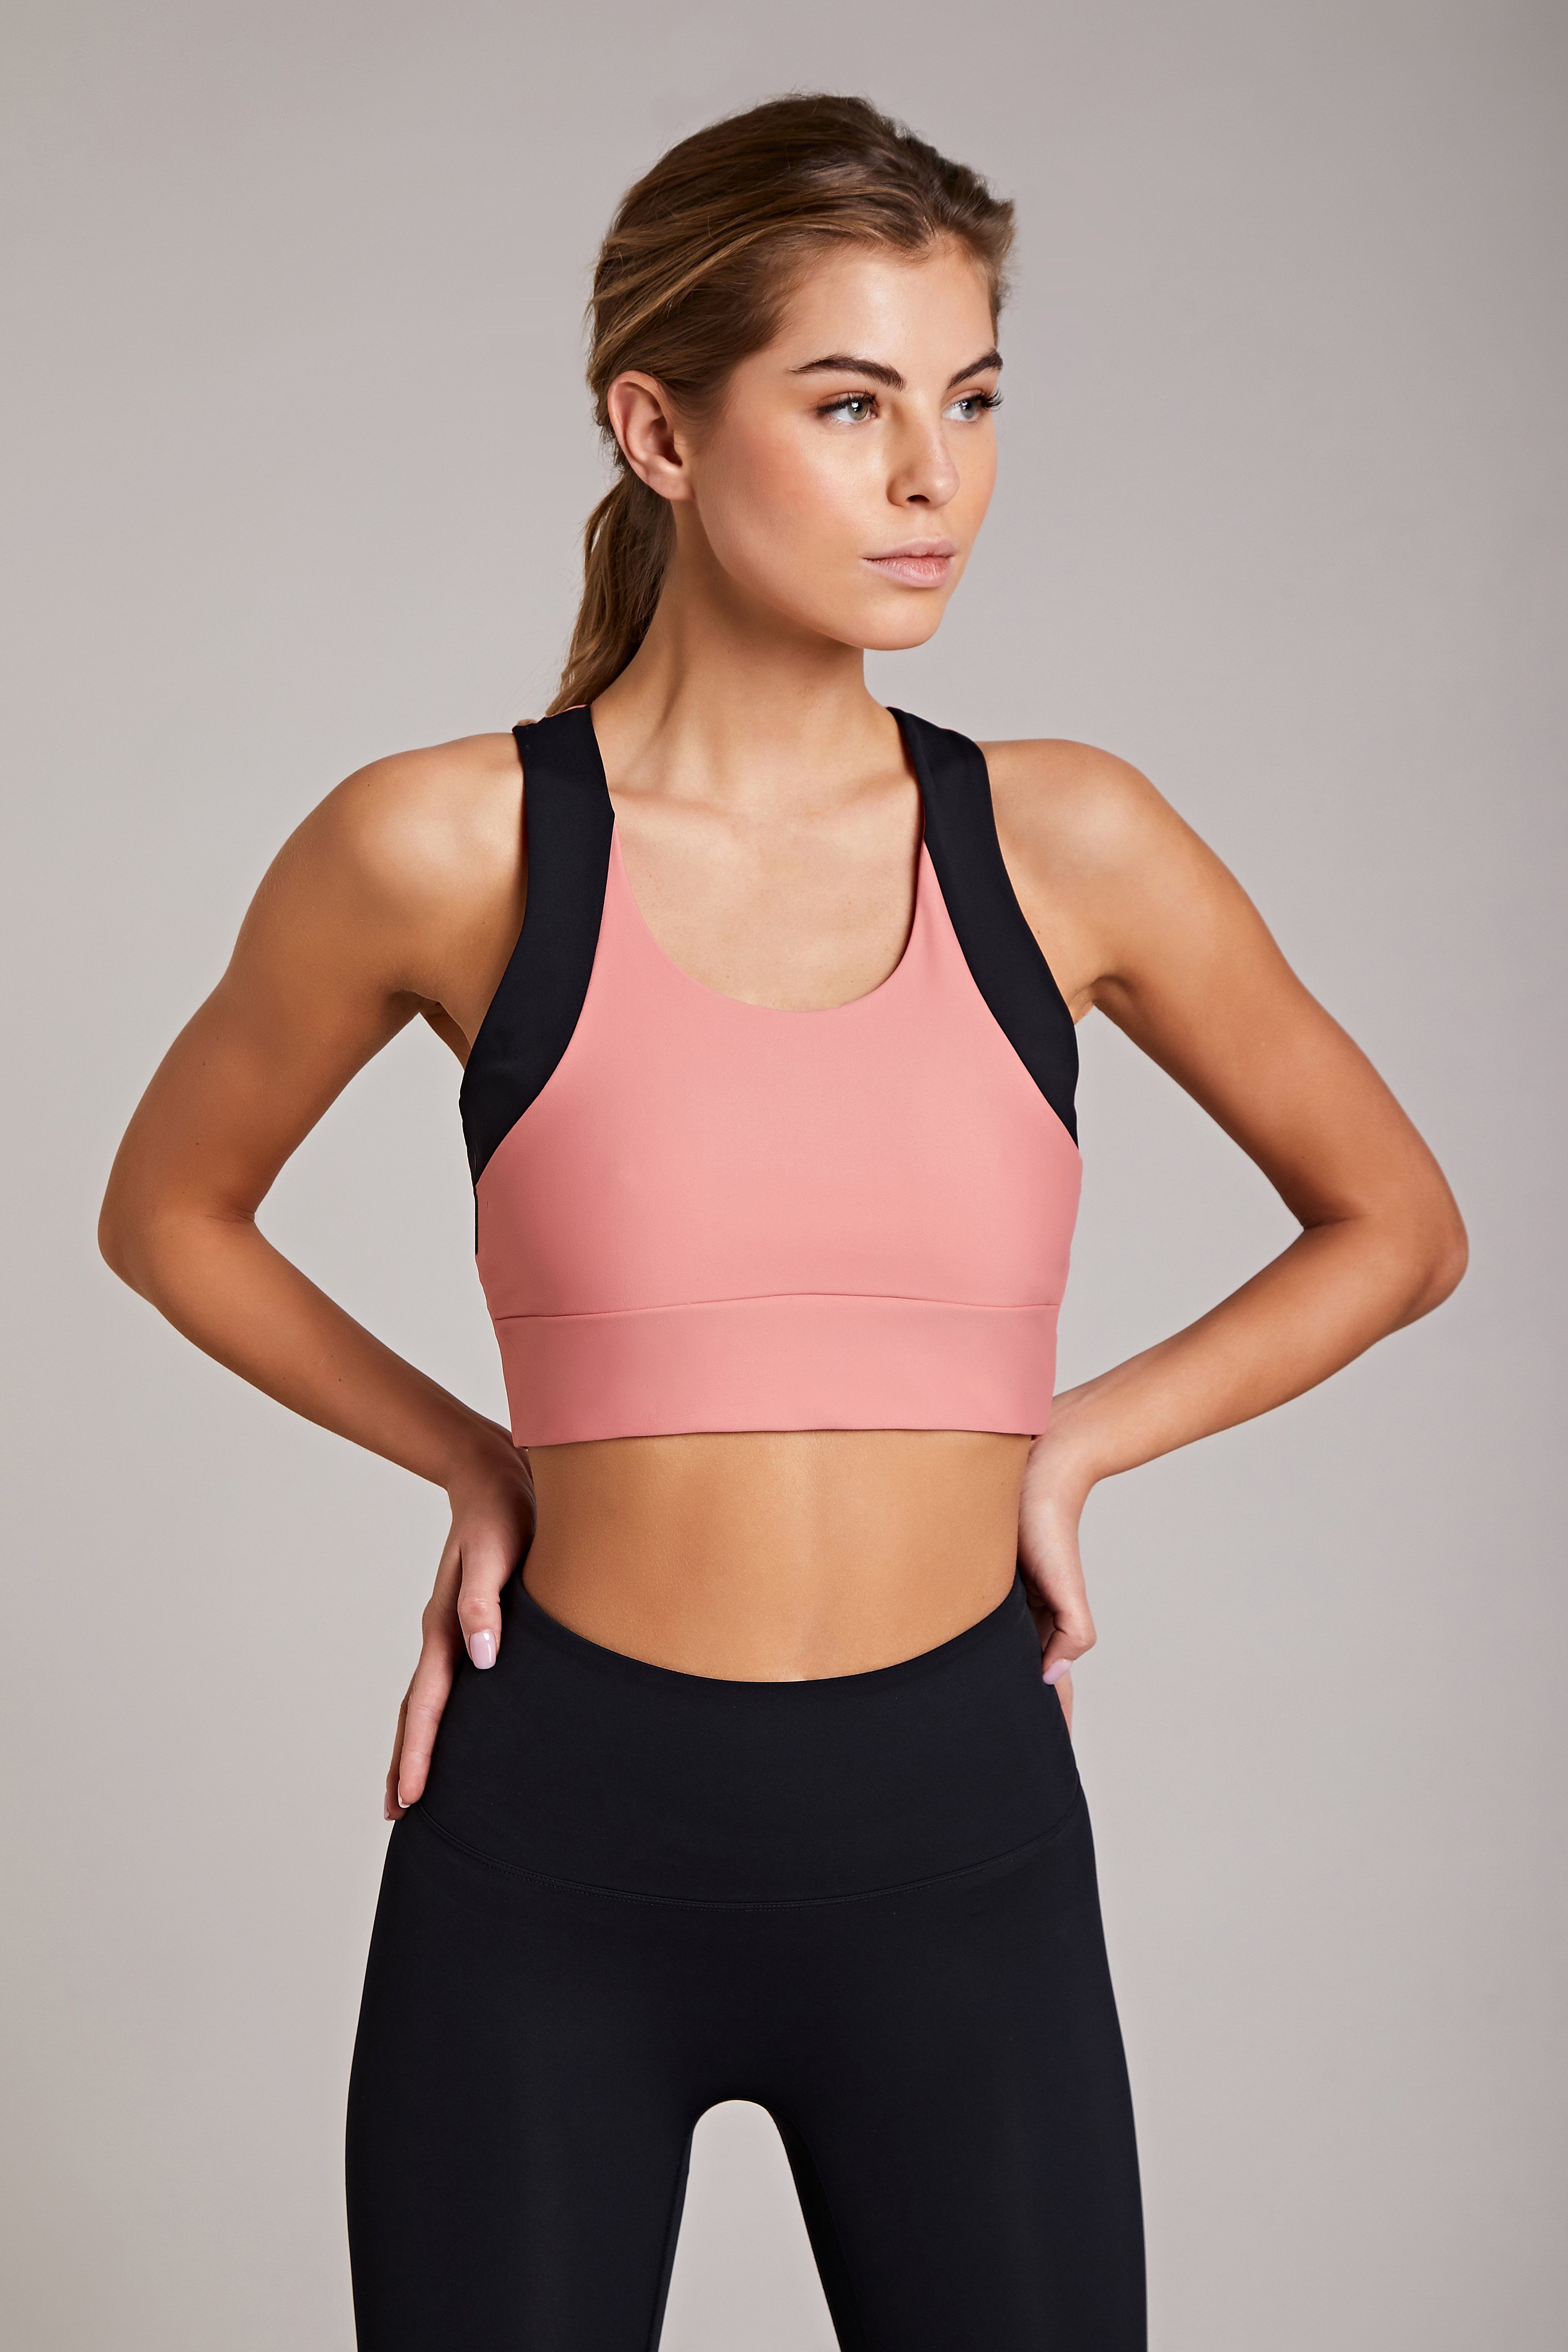 The Top 5 Sustainable, Female-Led Activewear Brands Now – Sasstainable